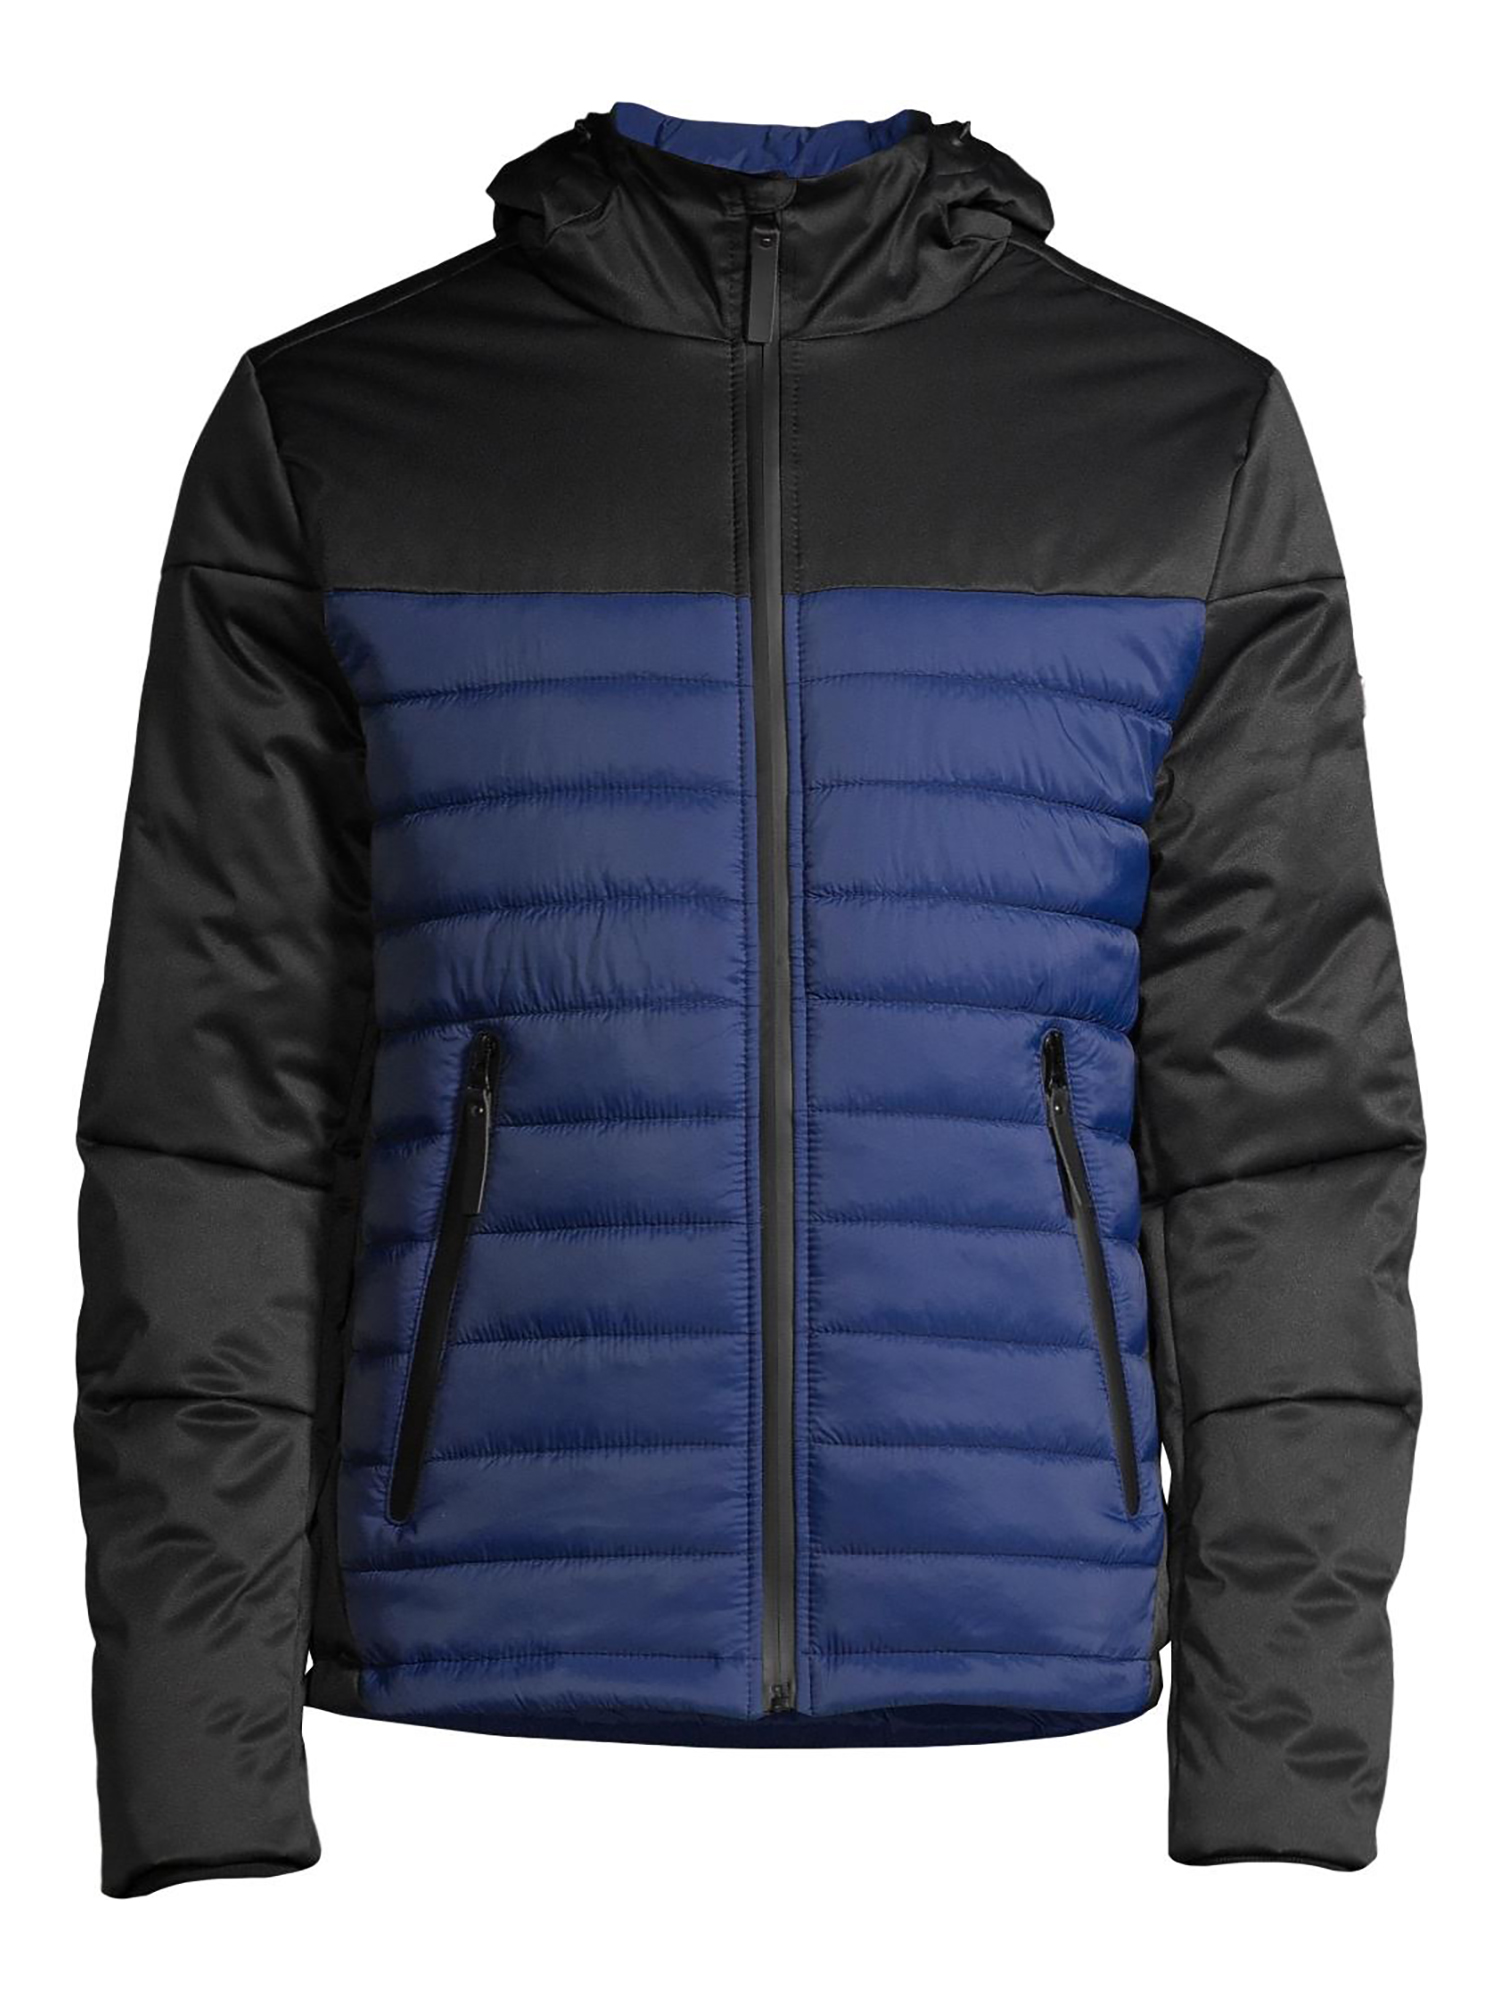 Swiss Tech Men's Hooded Softshell Quilted Mixed Media Jacket - image 5 of 7